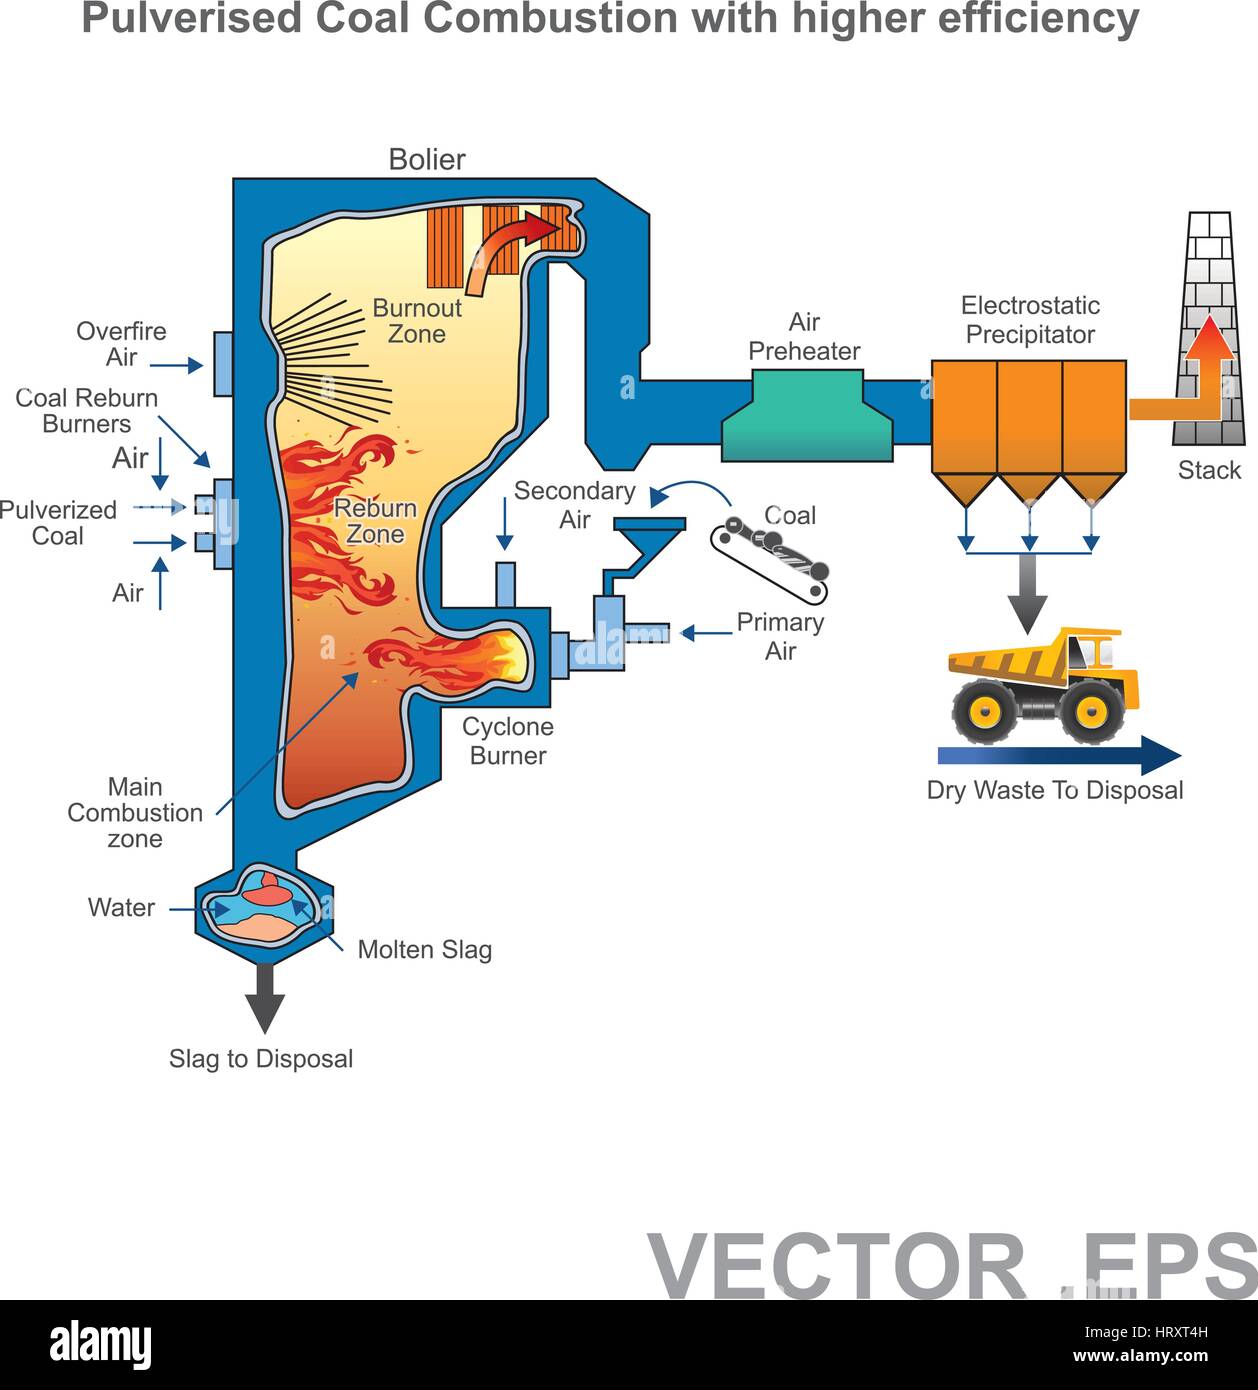 Biodiesel Production Process.It is renewable and natural domestic fuel extracted from animal fats or vegetable oils mostly from. vector, Illustration. Stock Vector